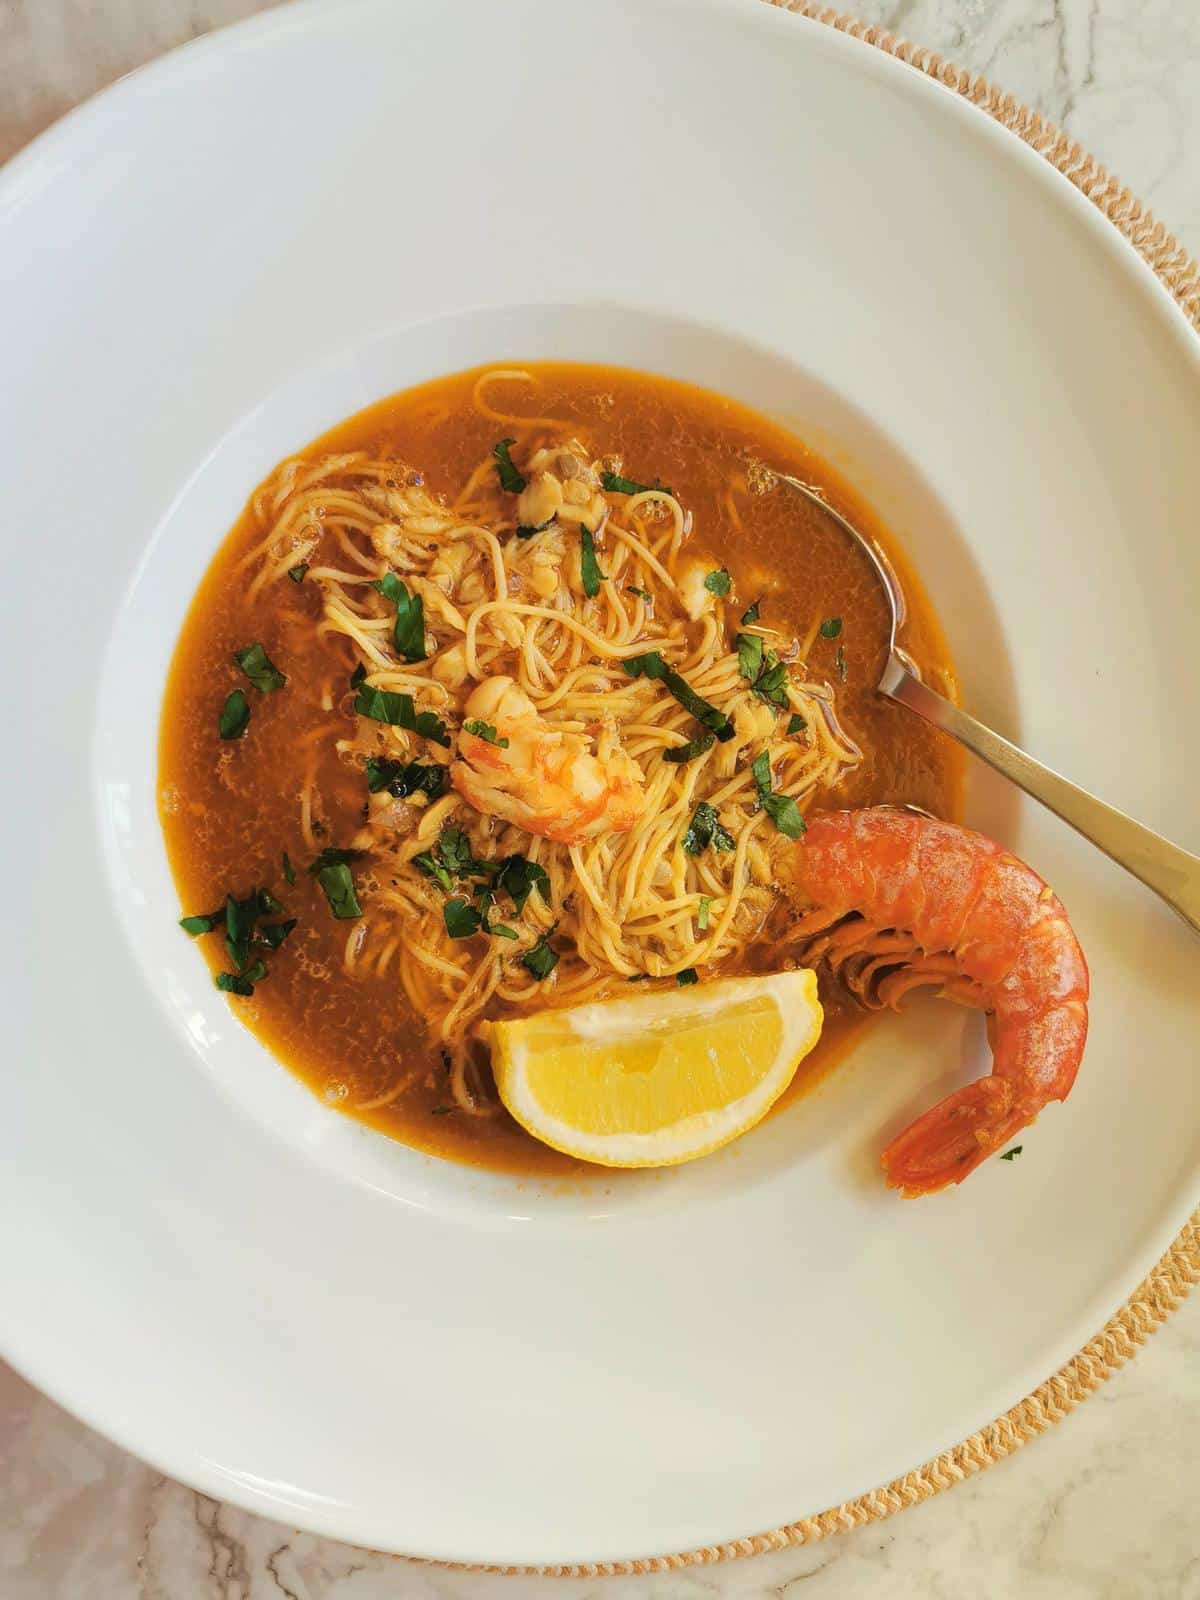 Italian fish soup with angel hair pasta and prawns.